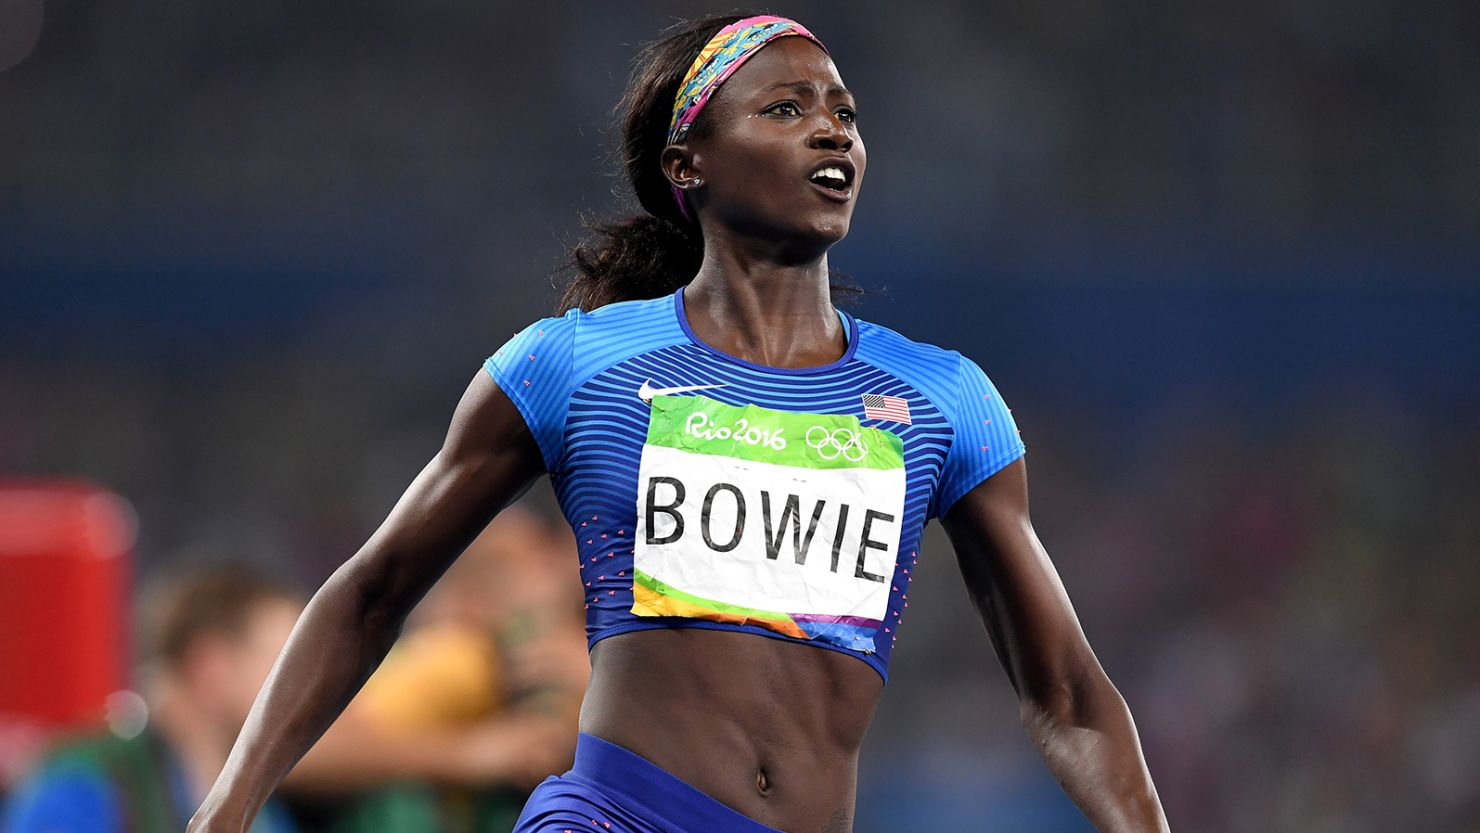 Tori Bowie of the United States crosses the finish line to win the 4x100m relay final at the 2016 Olympic Games in Rio de Janeiro.